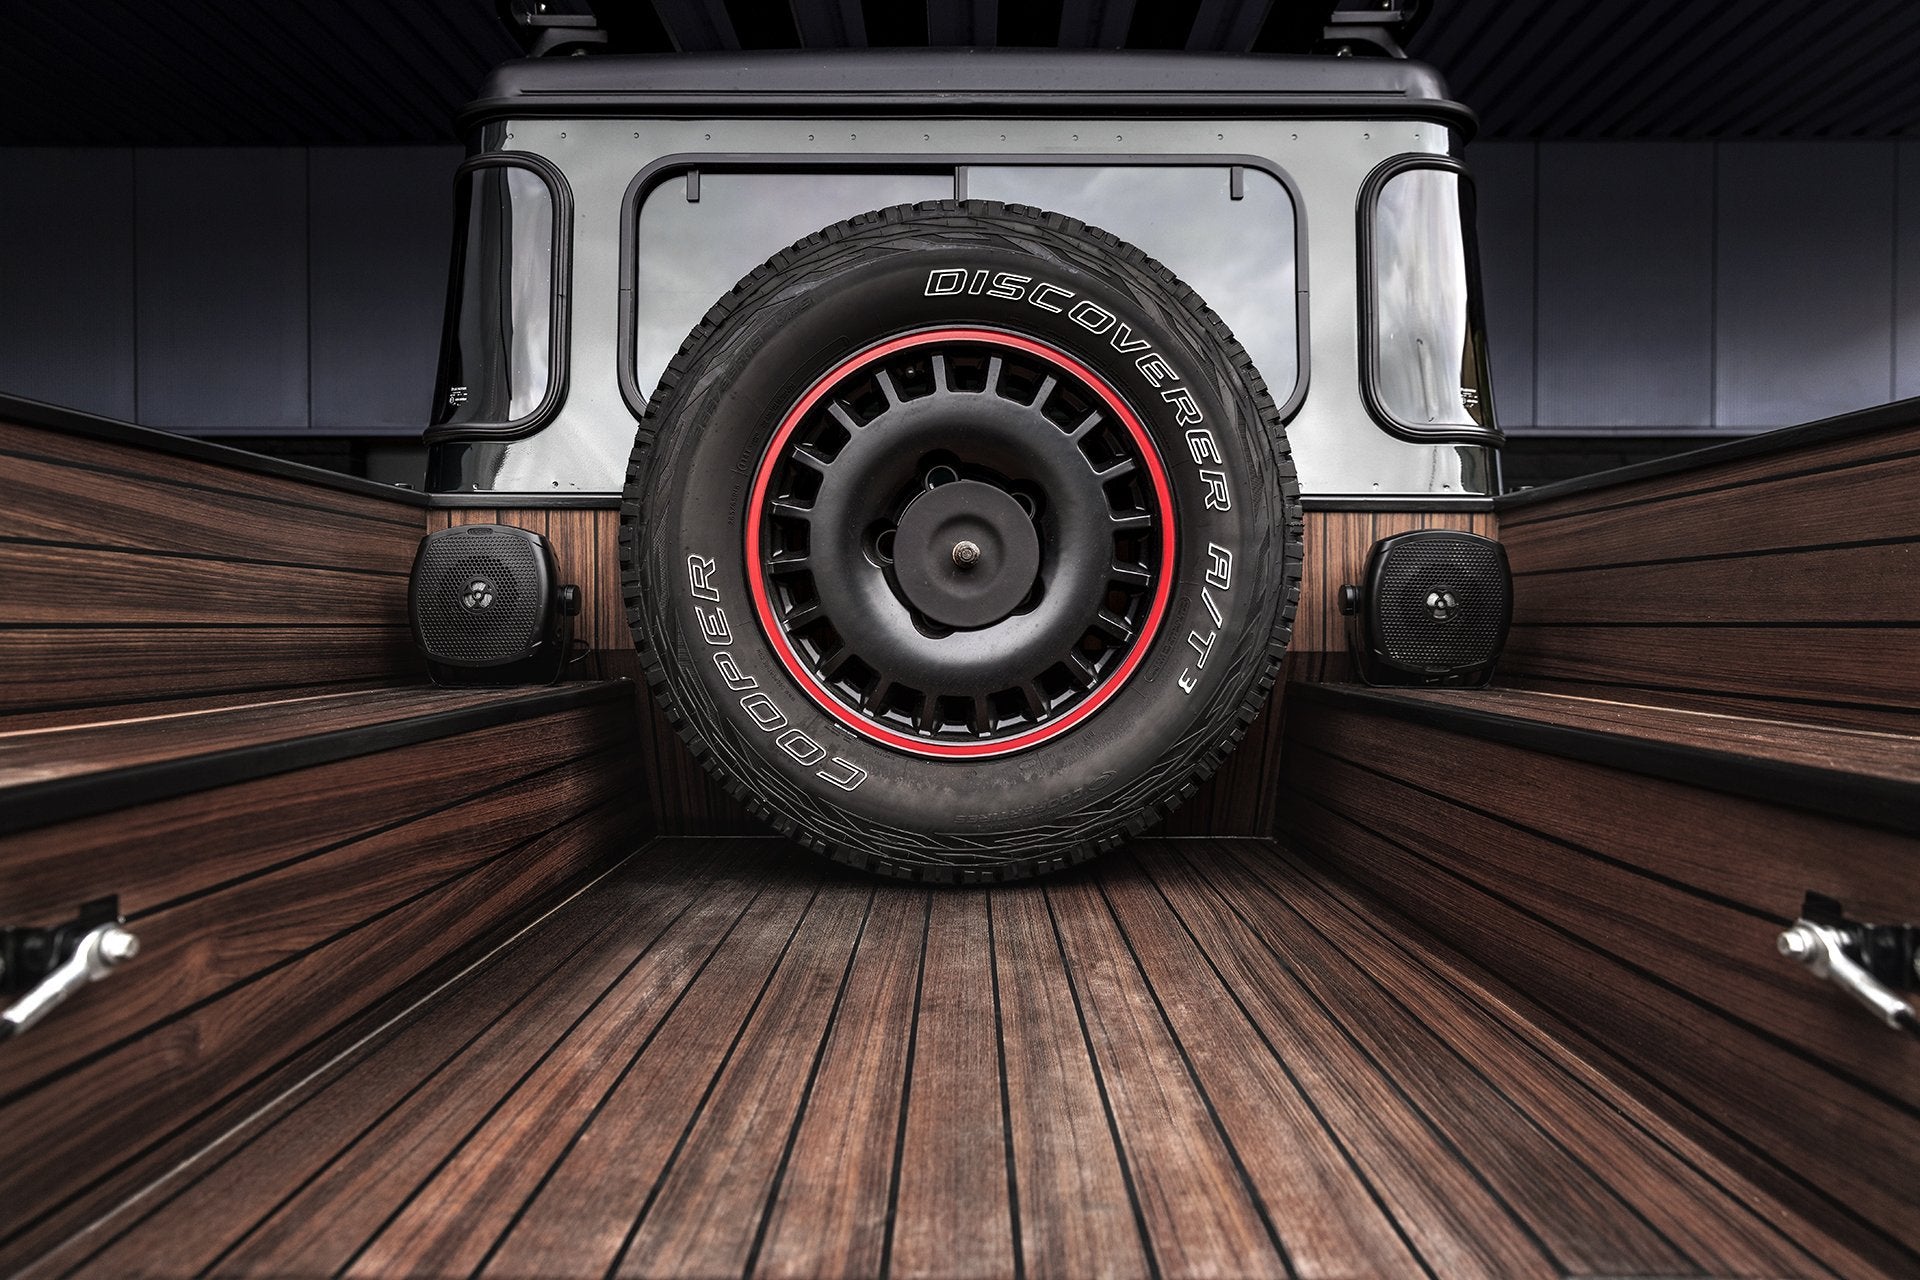 Land Rover Defender 110 (1991-2016) Wooden Teak Decking by Chelsea Truck Company - Image 2004